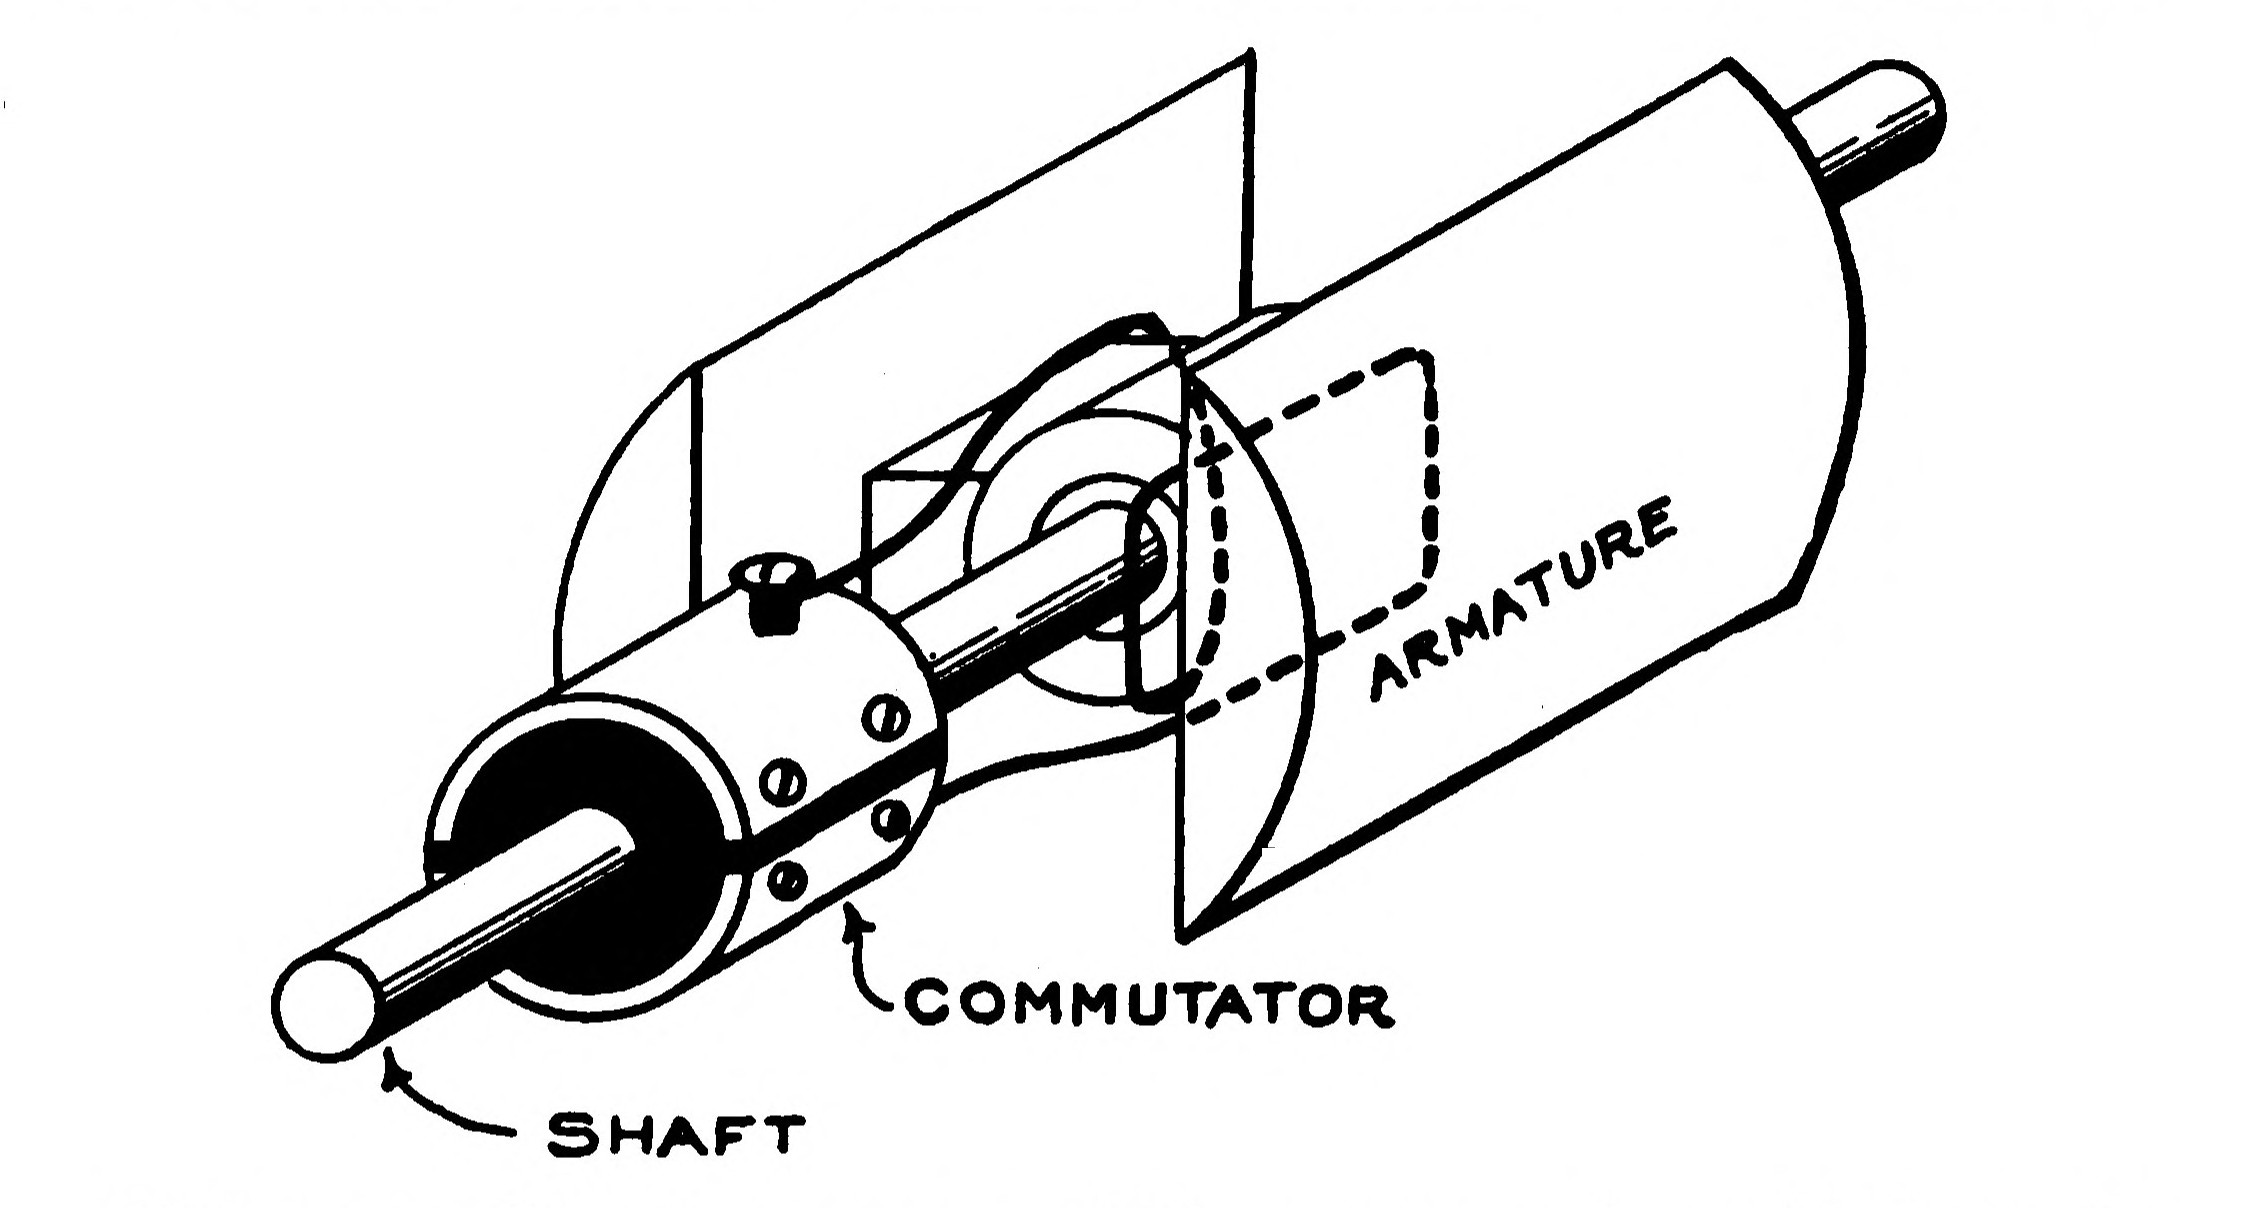 FIG. 127.—The Armature and Commutator Assembled on the Shaft ready for winding.